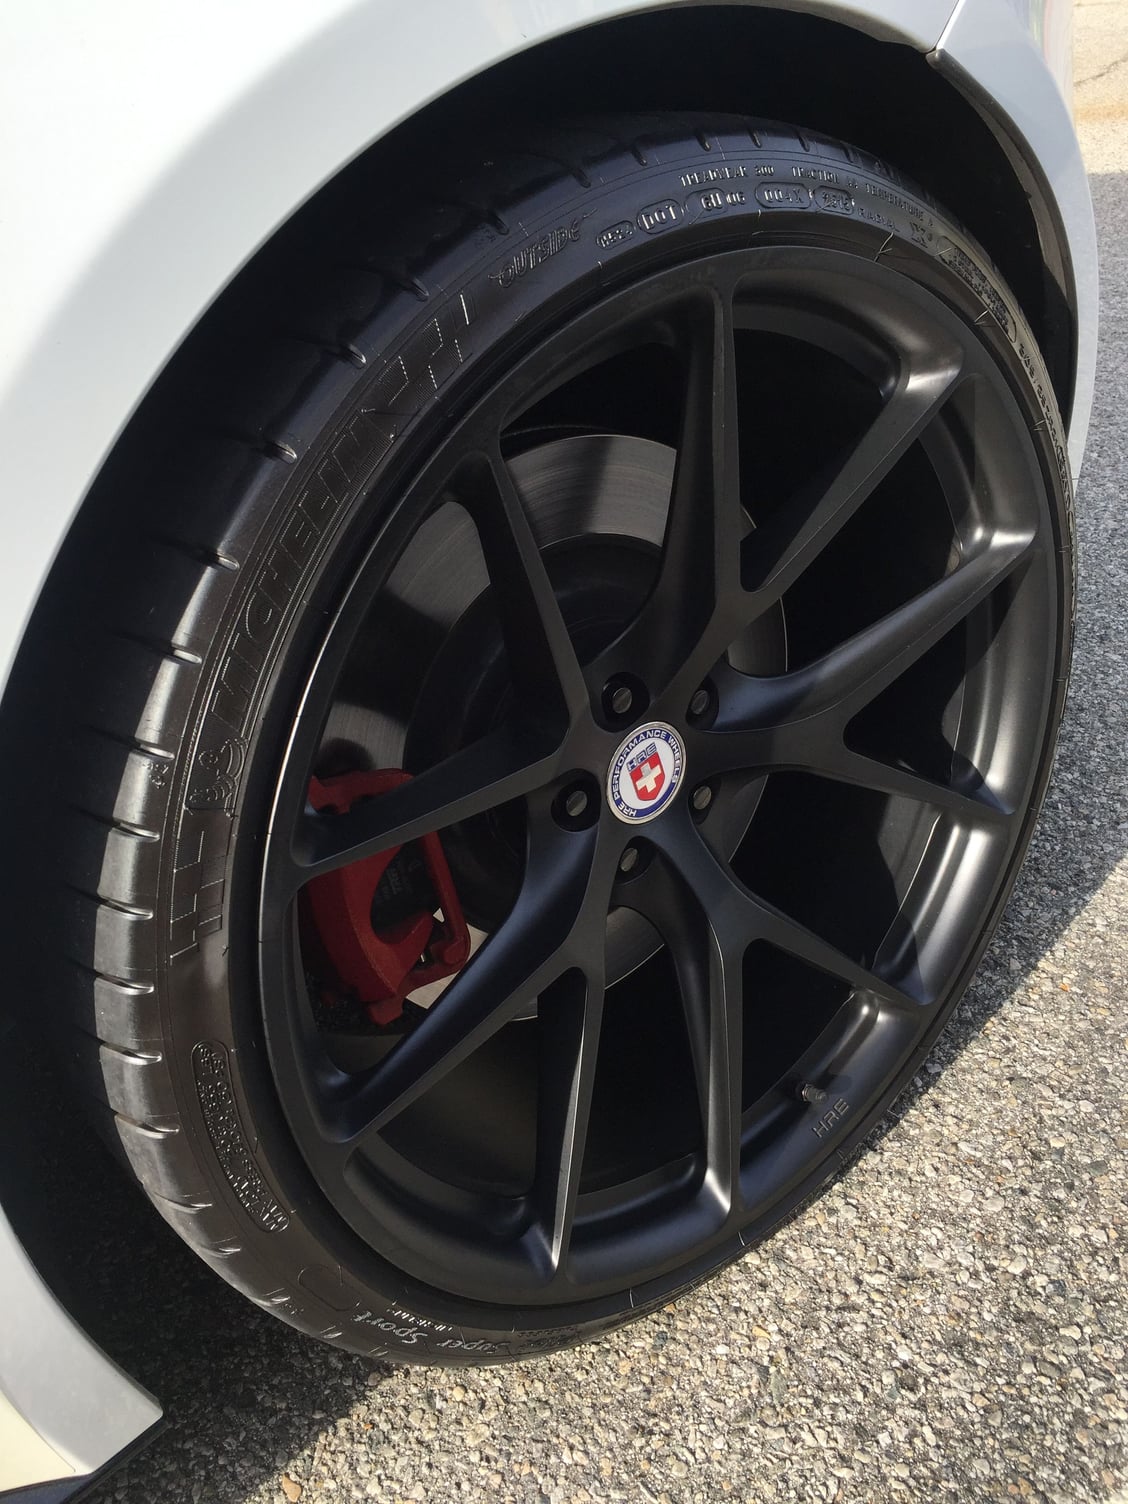 Wheels and Tires/Axles - FS: HRE P101 Black Forged 21" Wheels F-Type - Used - 2013 to 2019 Jaguar F-Type - Los Angeles, CA 91406, United States